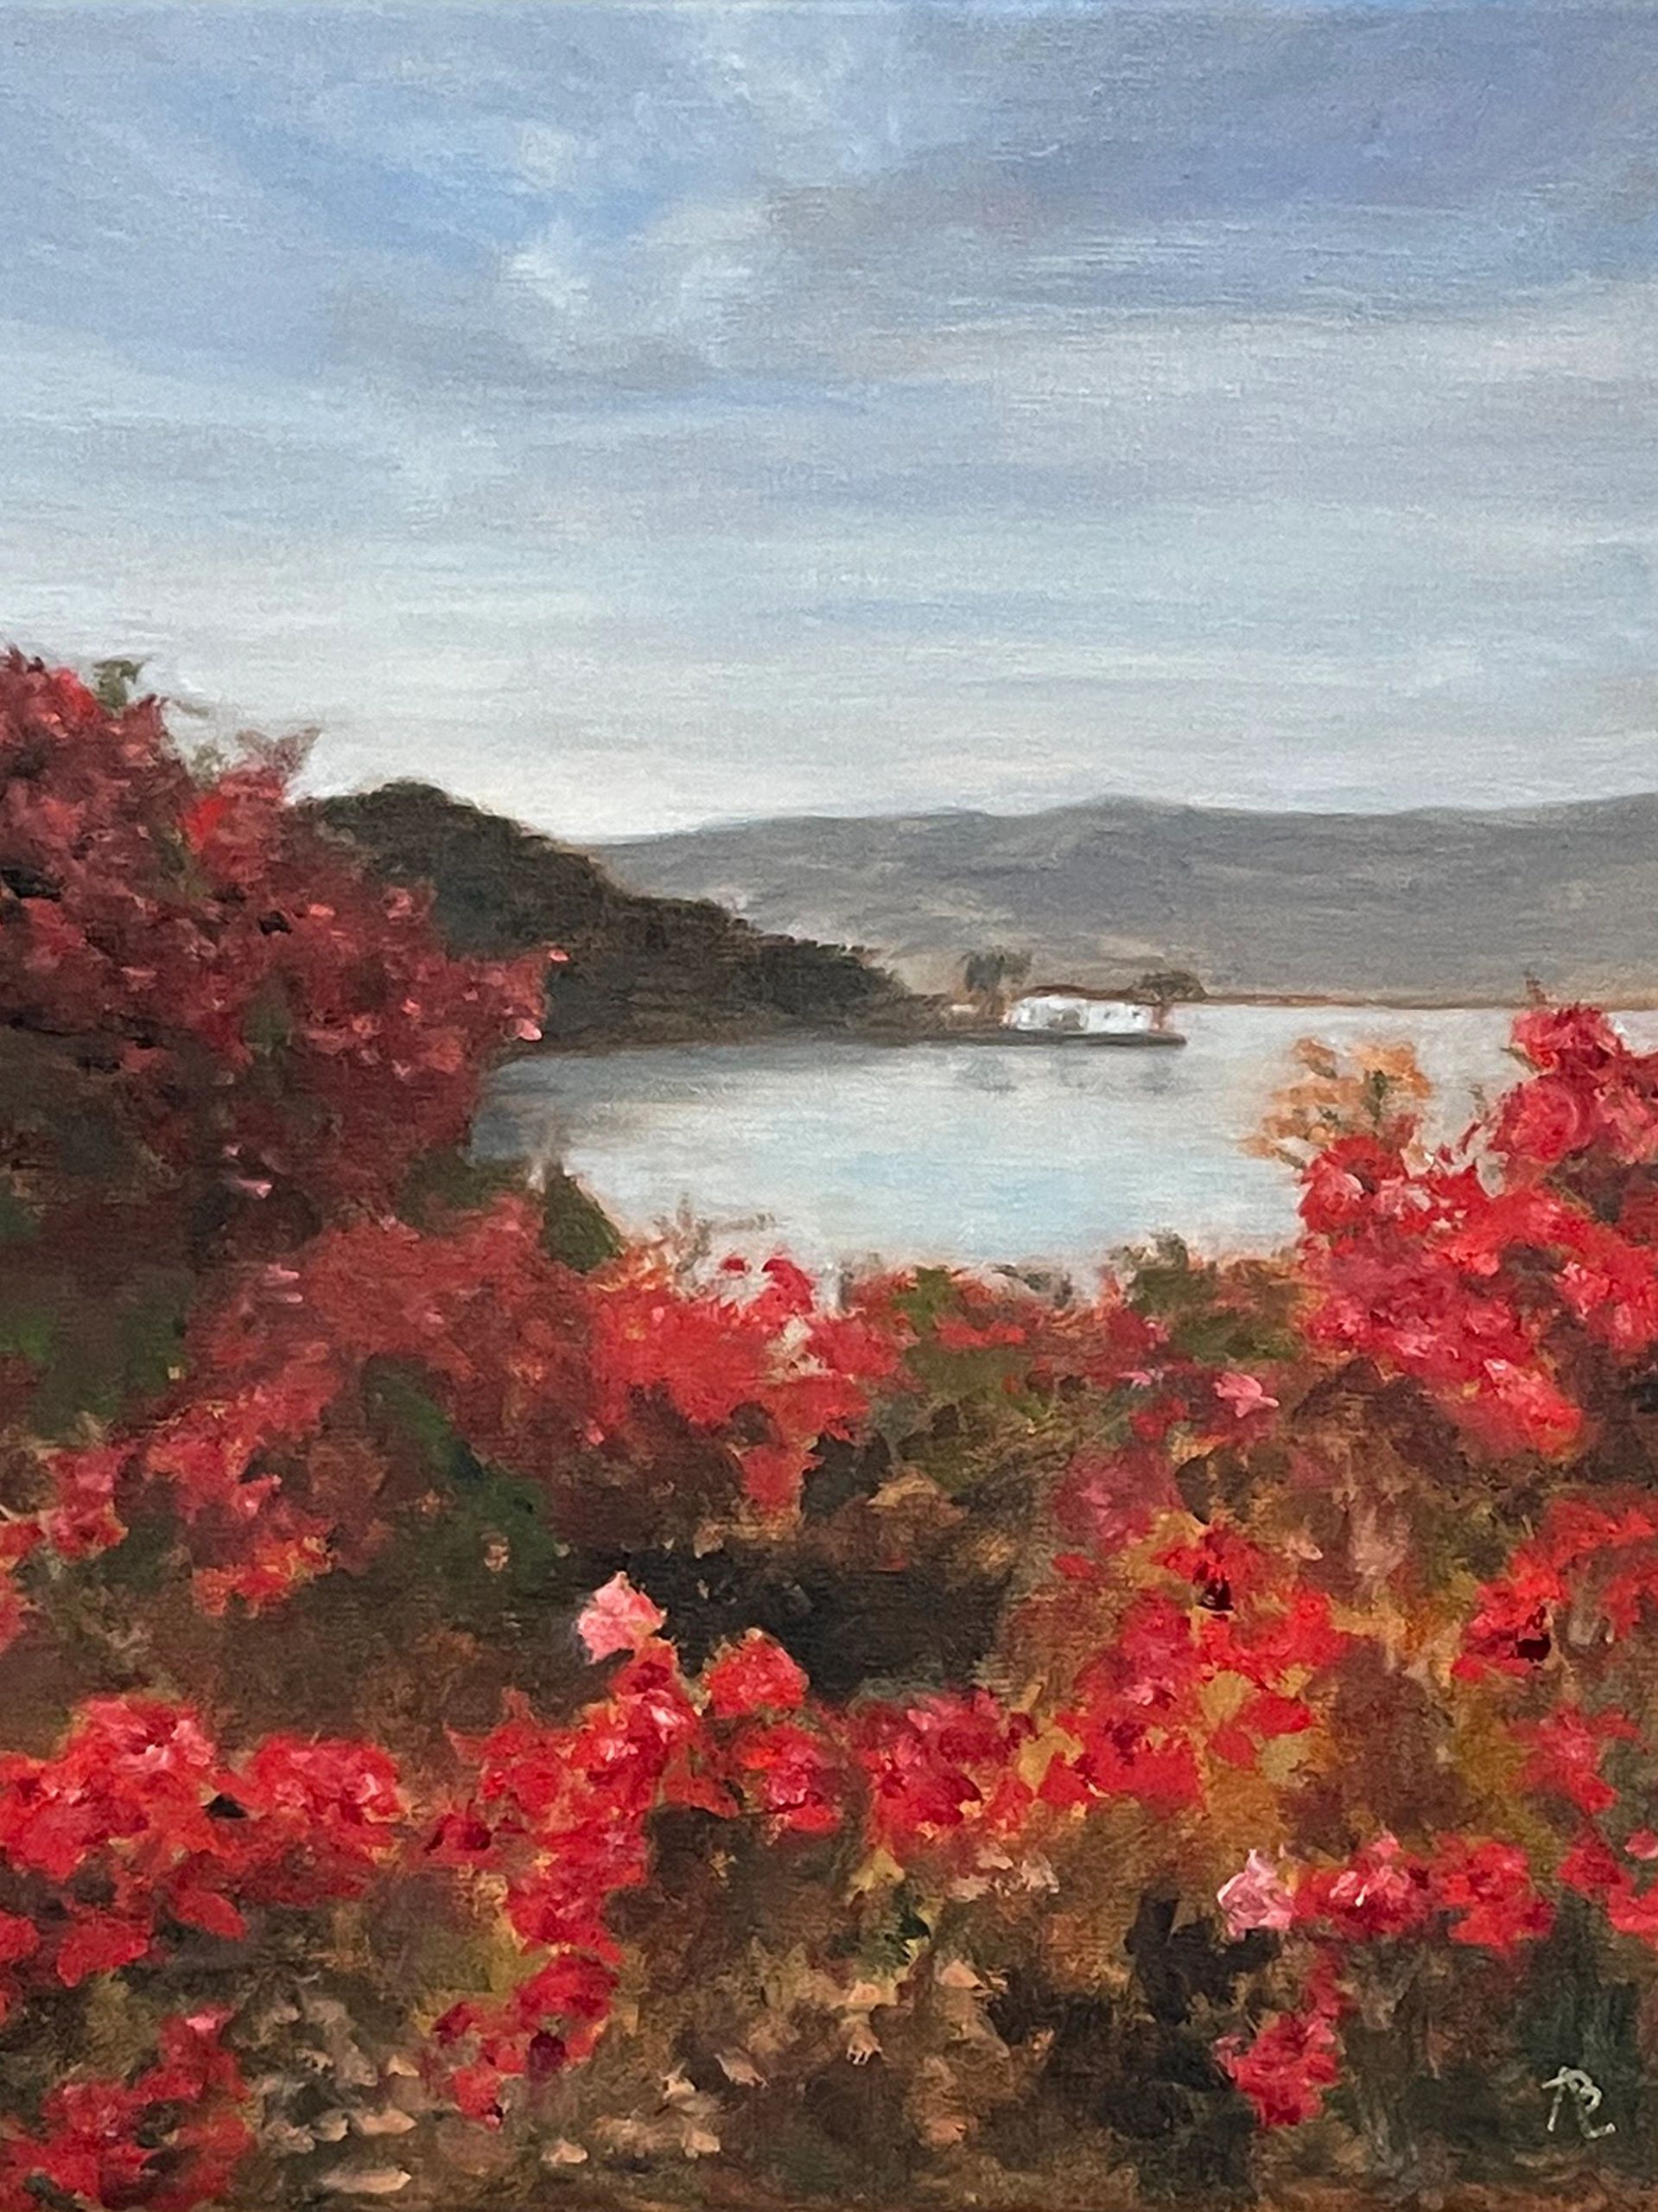 Red flowers surround one pink one, beyond a view of a home on the bay.